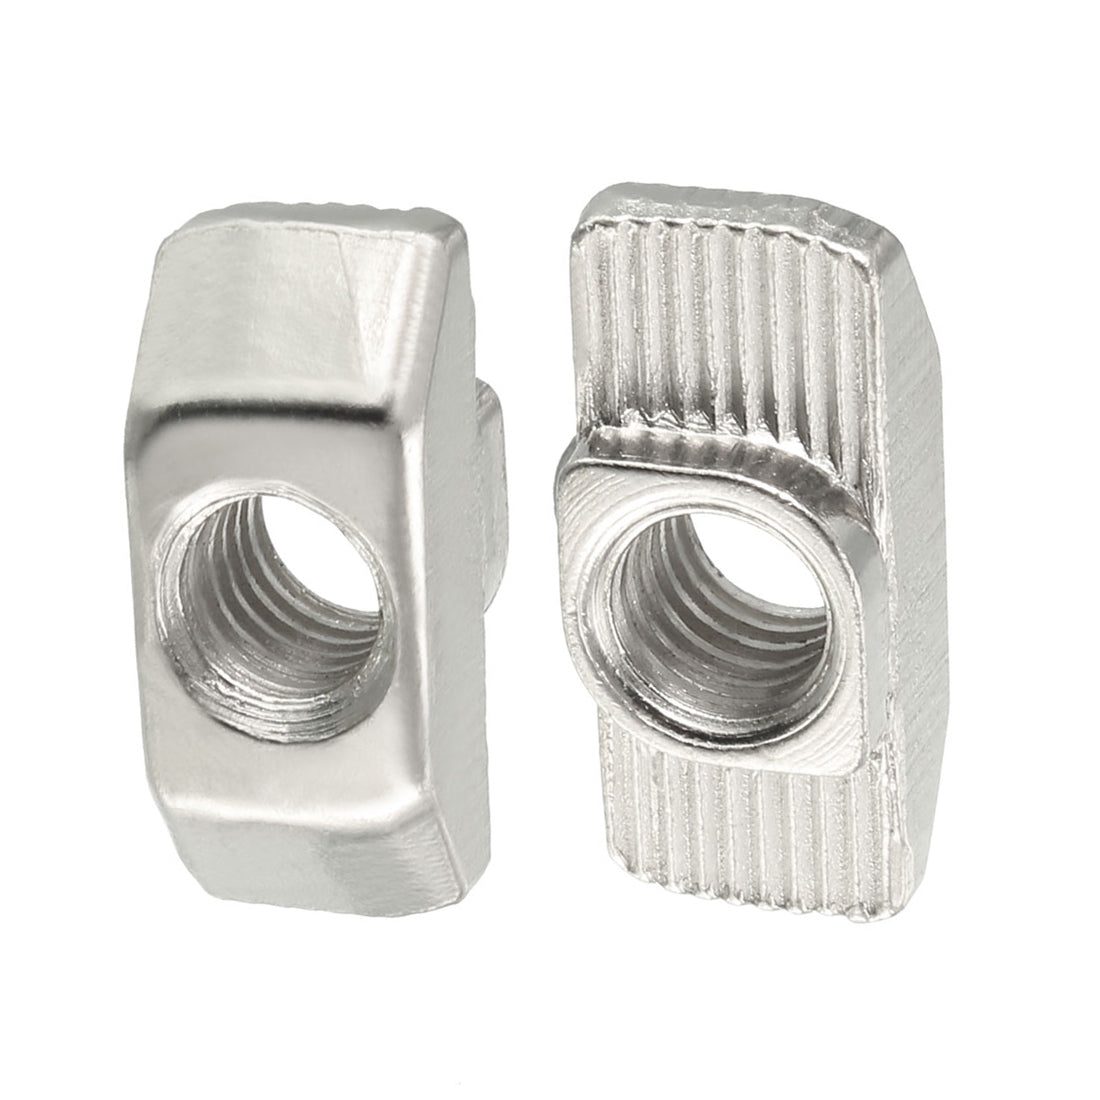 uxcell Uxcell Sliding T Slot Nuts, M6 Thread for 4040 Series Aluminum Extrusion Profile 30pcs